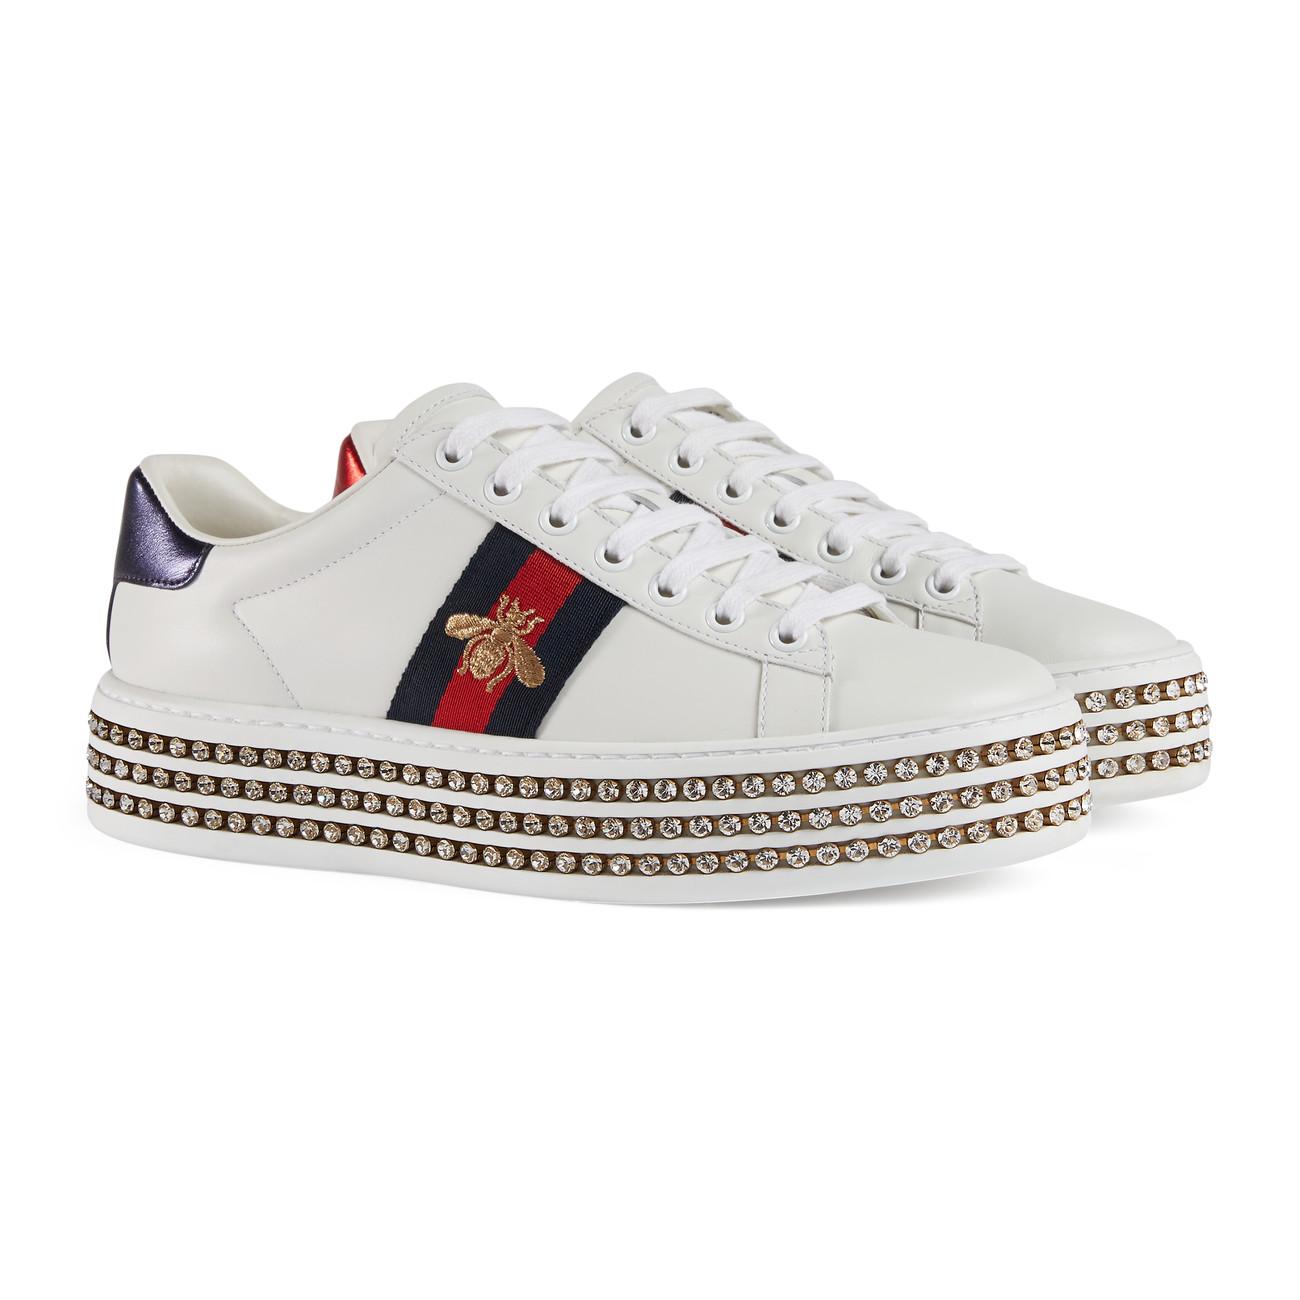 Gucci Leather Ace Sneaker With Crystals in White Silver (White) - Lyst